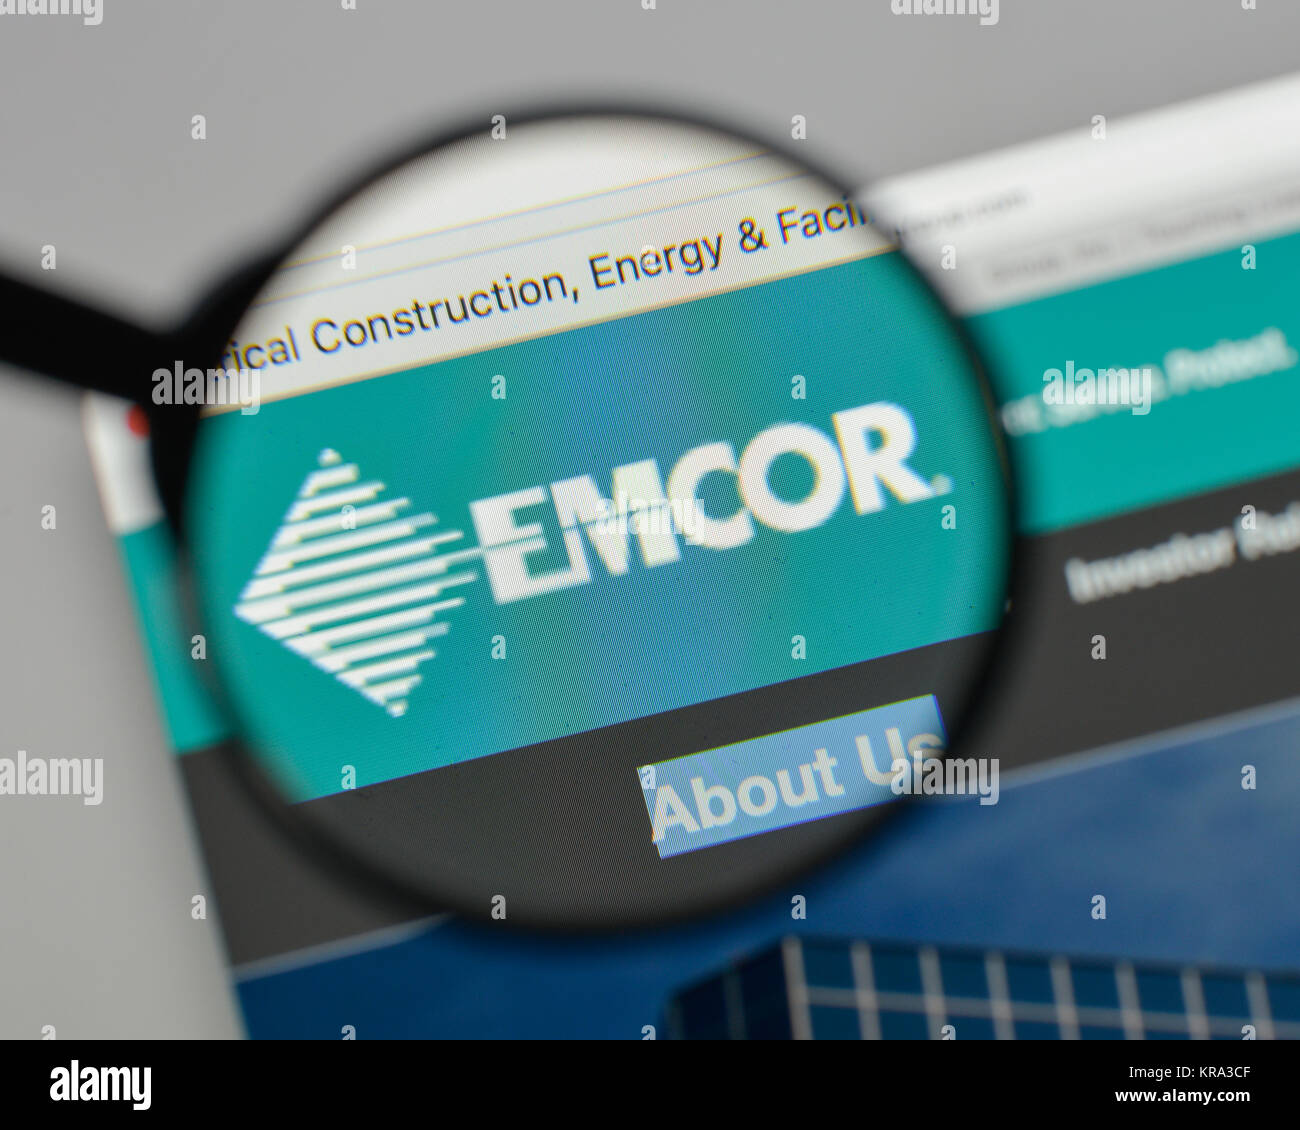 Milan, Italy - August 10, 2017: EMCOR Group logo on the website homepage. Stock Photo